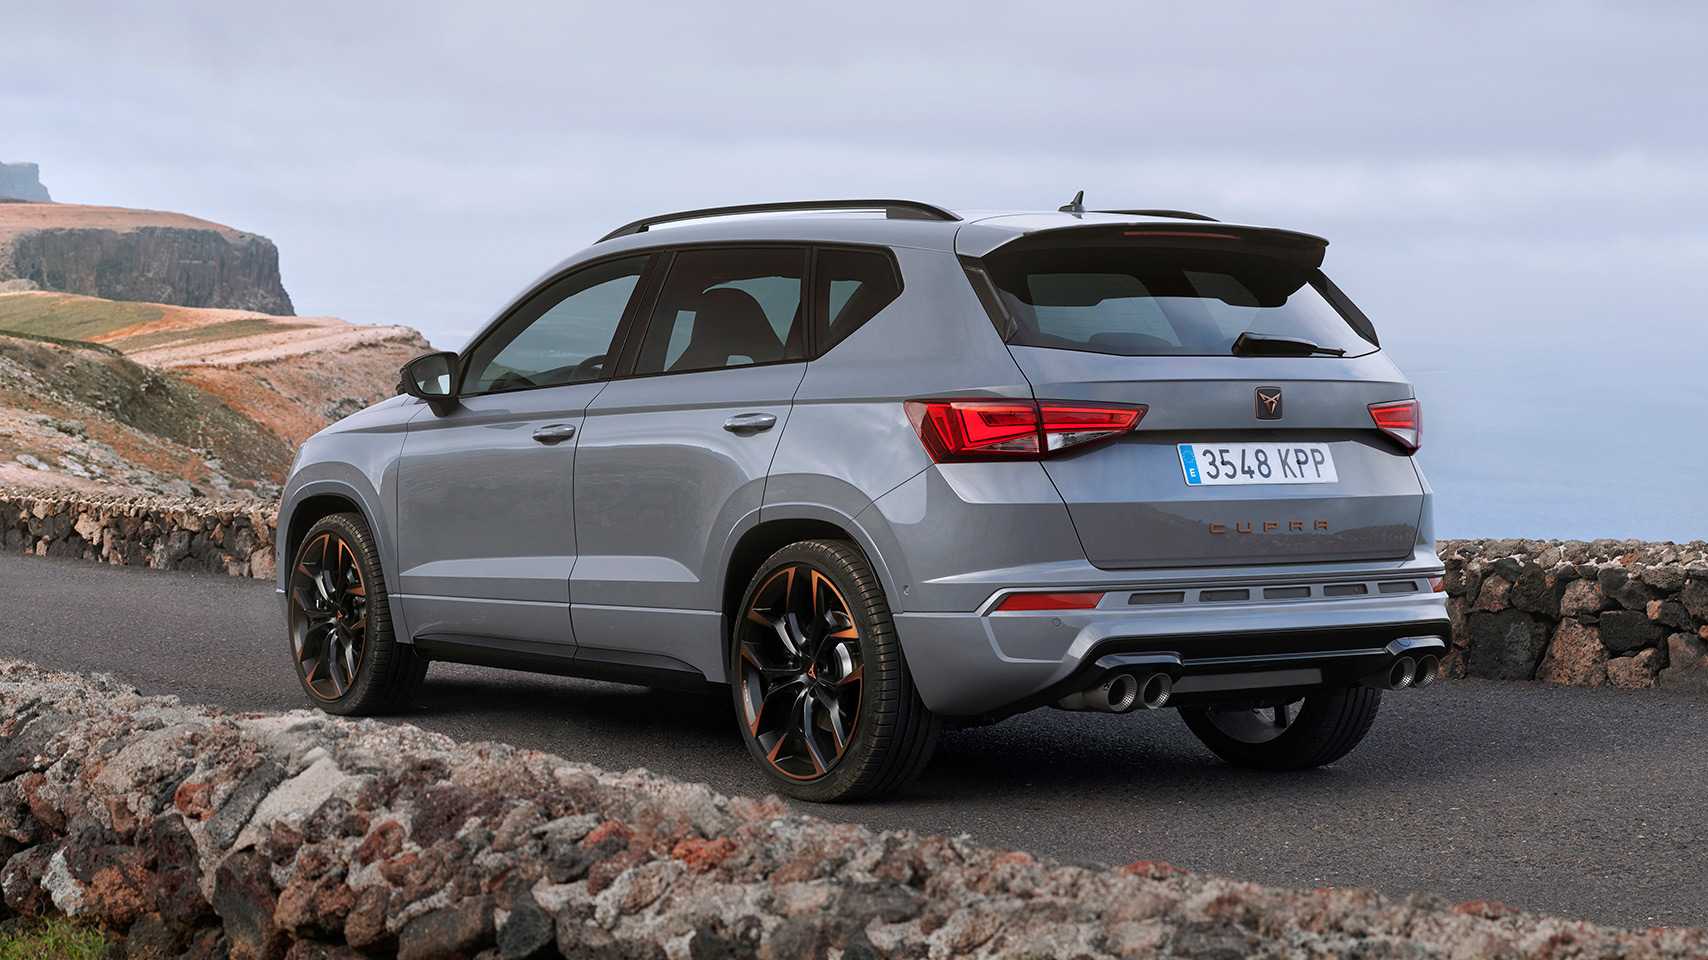 CUPRA Ateca Limited Edition on the road